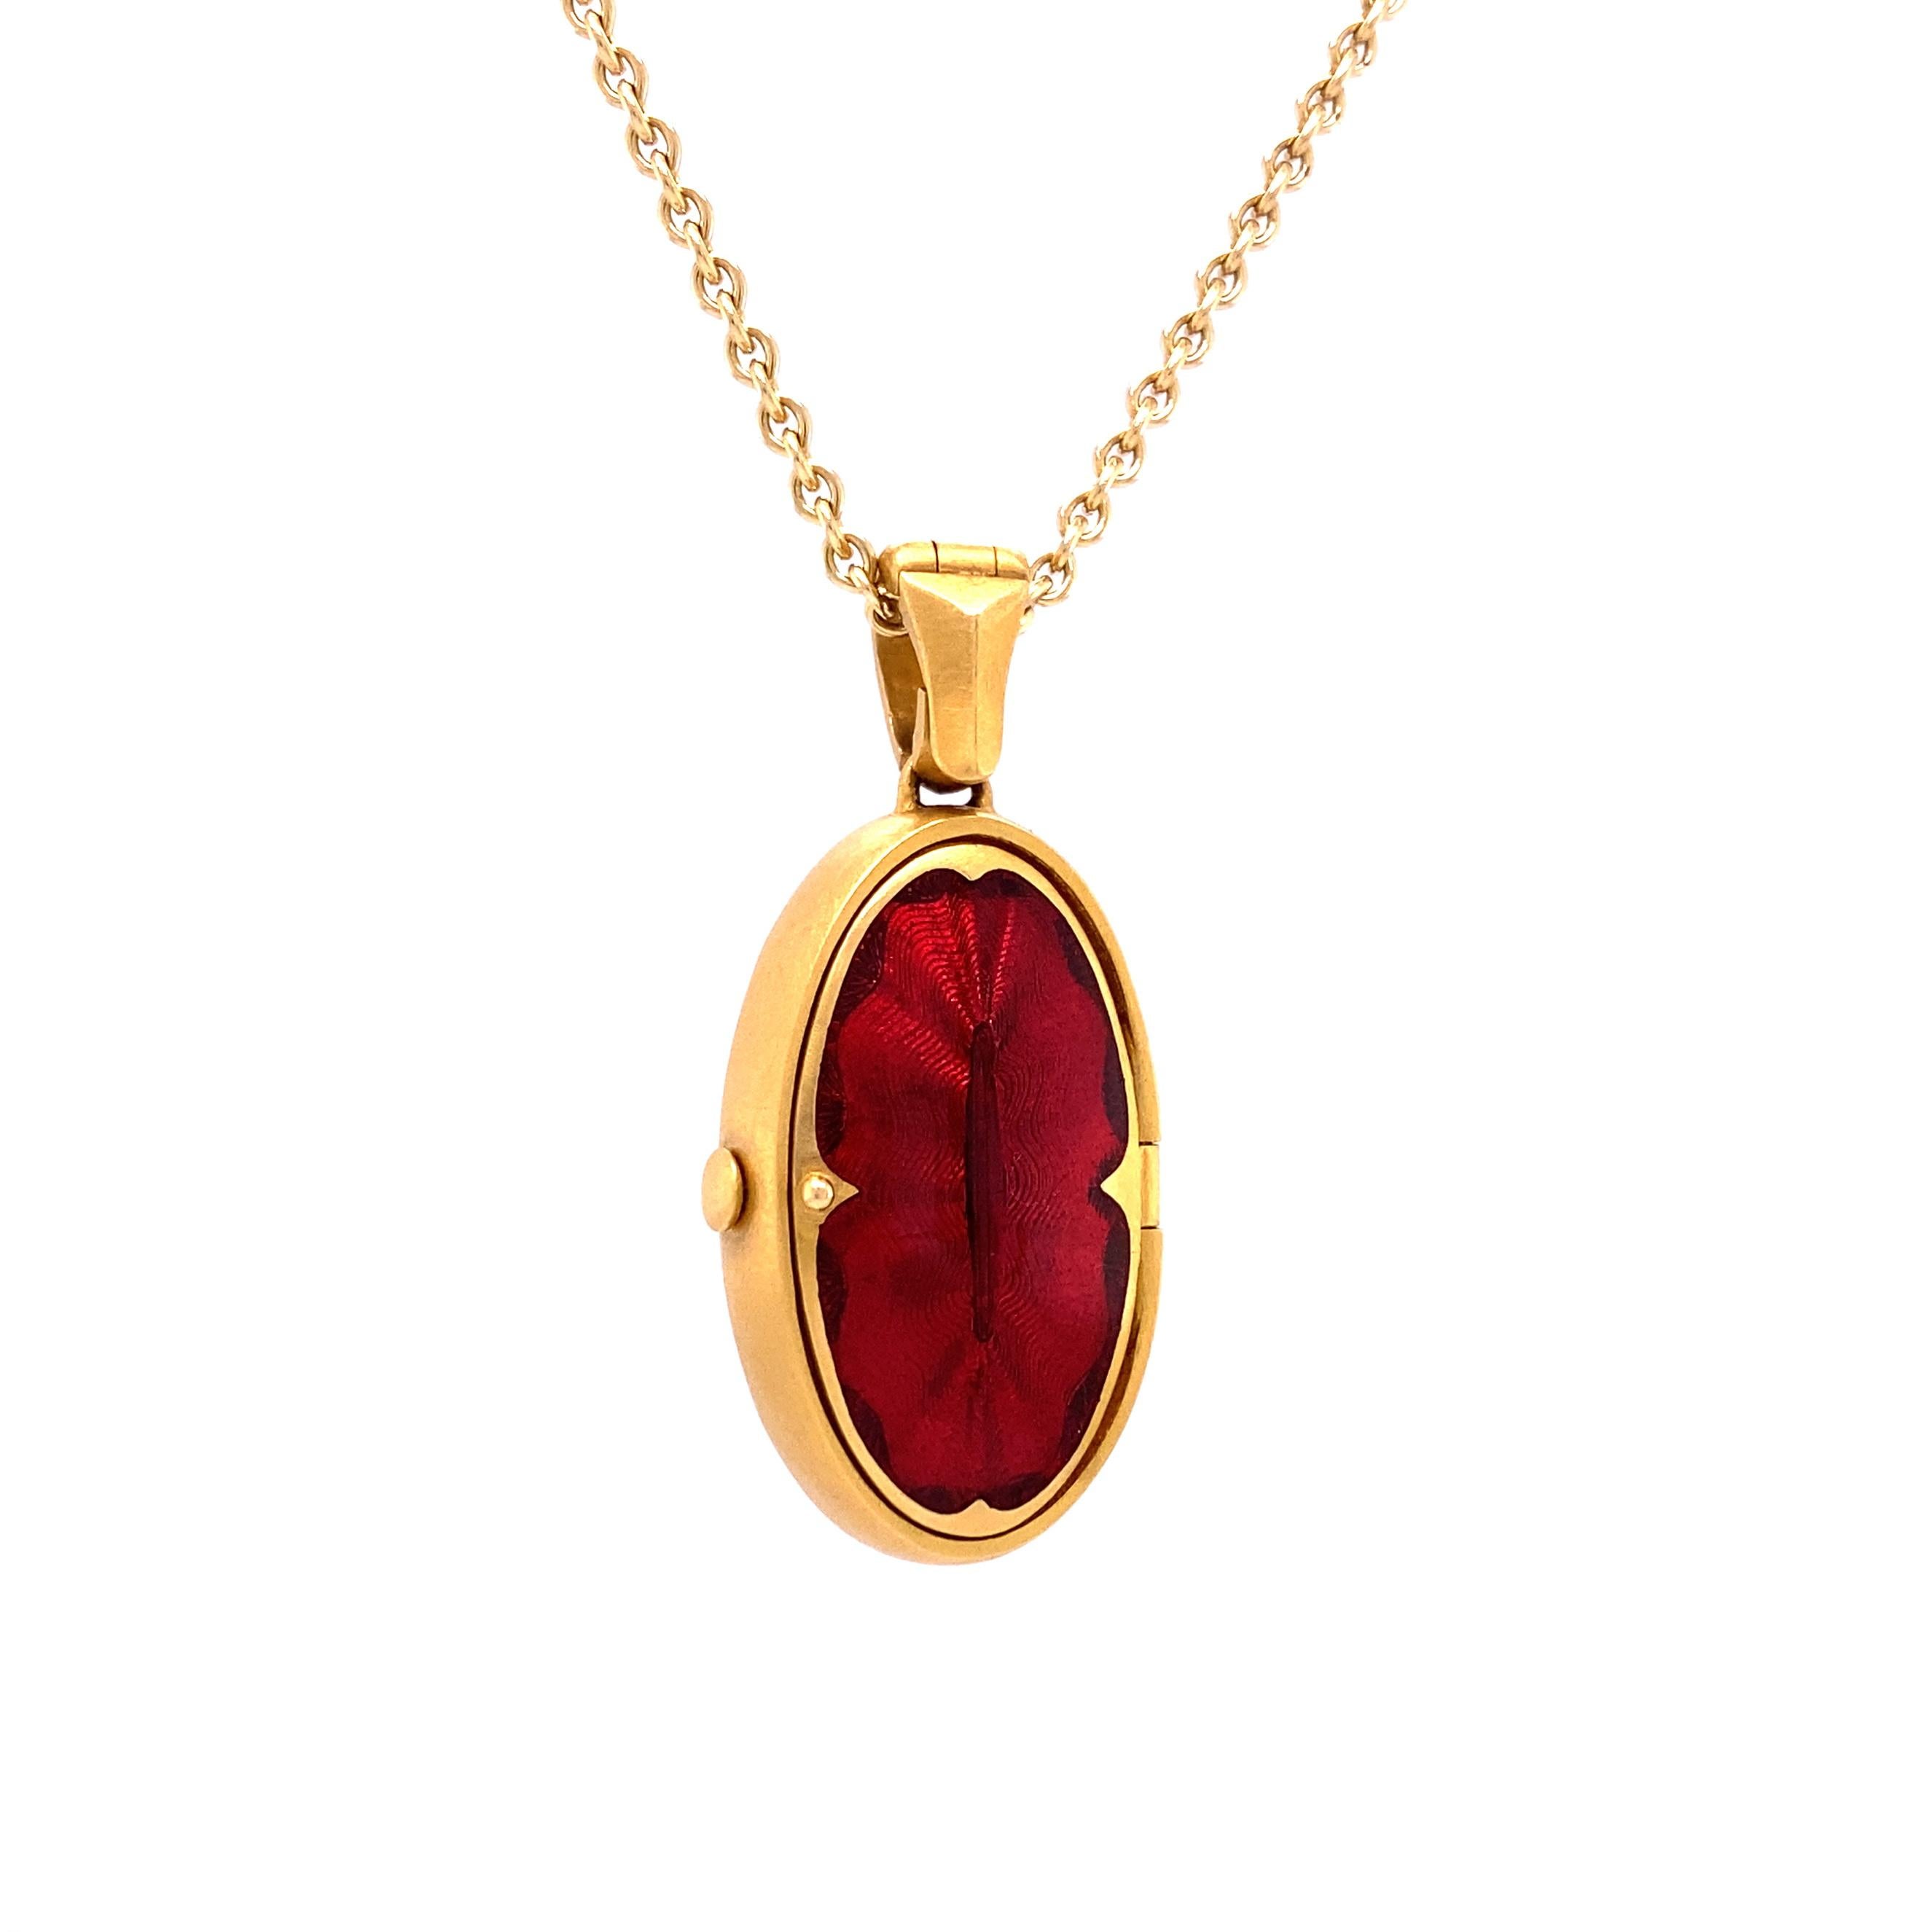 Women's or Men's Oval Pendant Locket 18k Yellow Gold Red Guilloche Enamel Paillons 26.0 x 15.5 mm For Sale